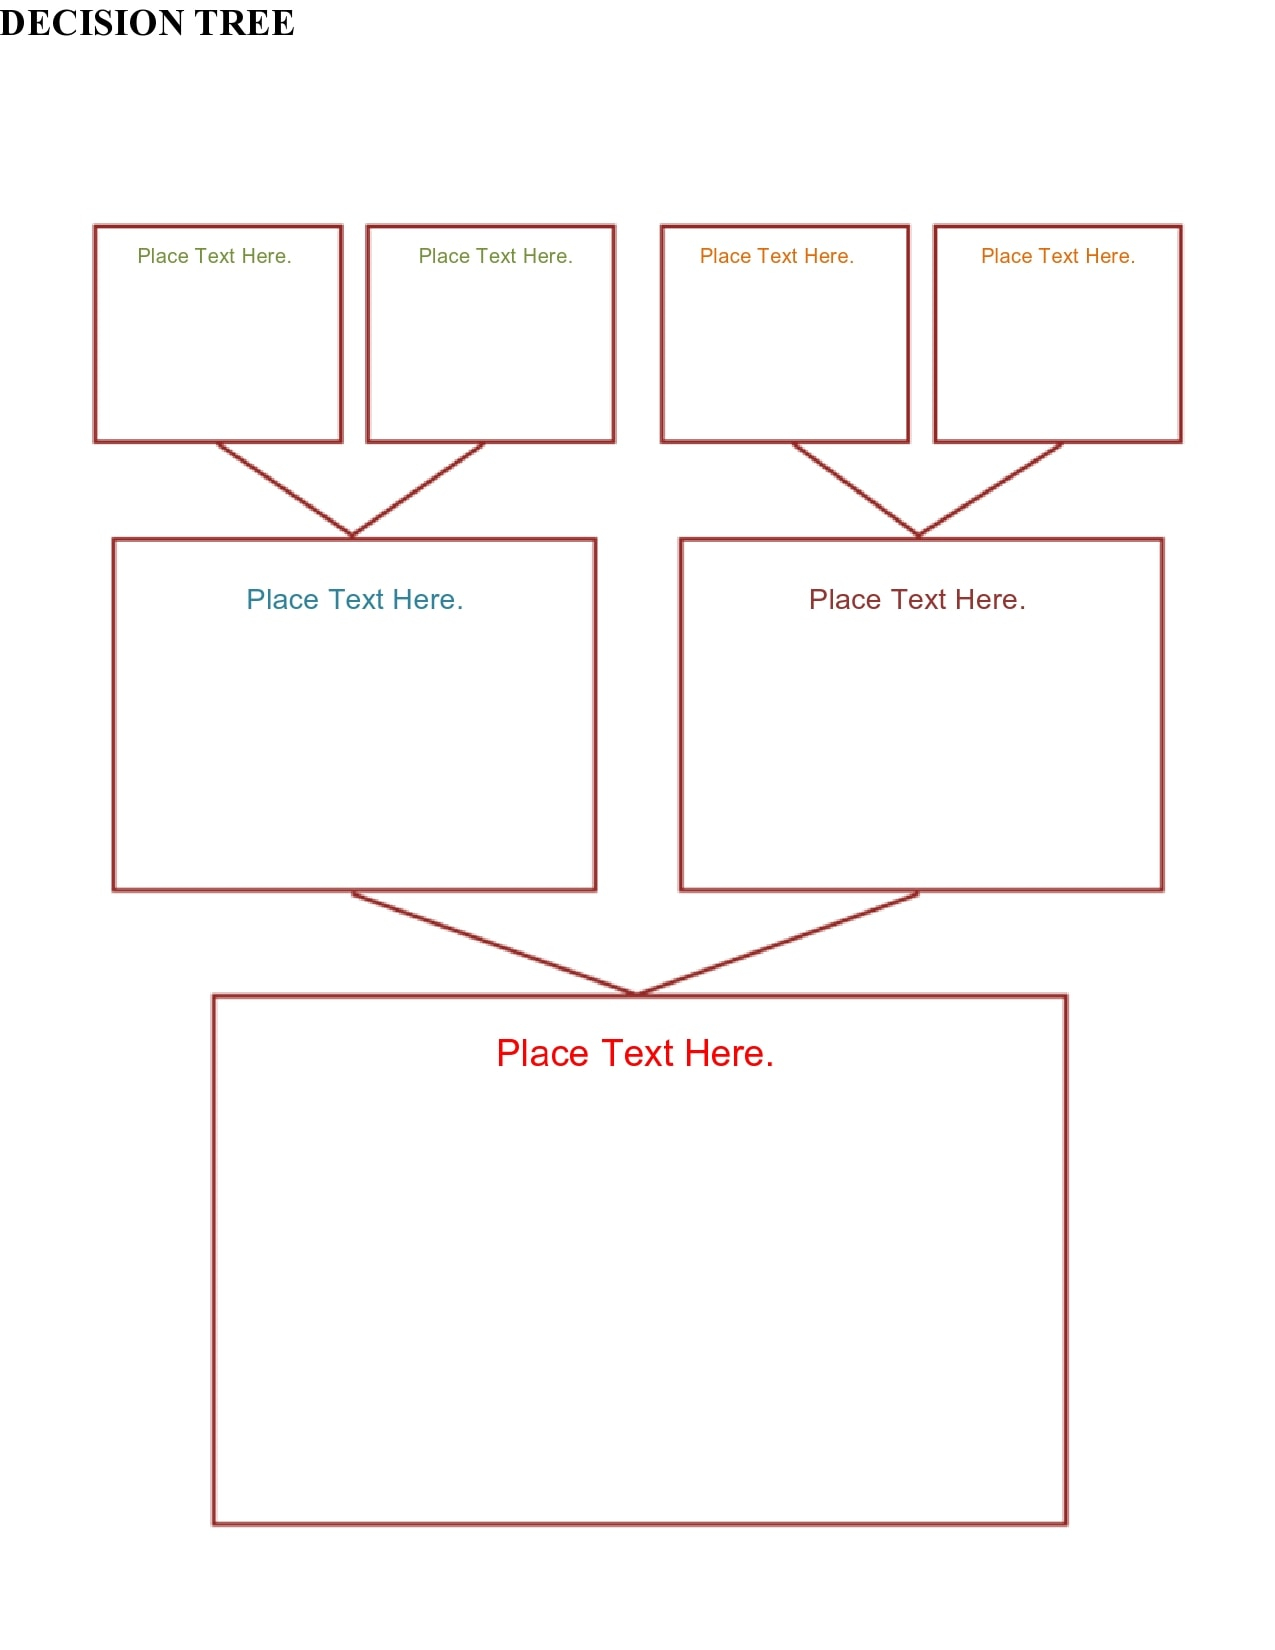 10 Free Decision Tree Templates (Word & Excel) – TemplateArchive For Blank Decision Tree Template